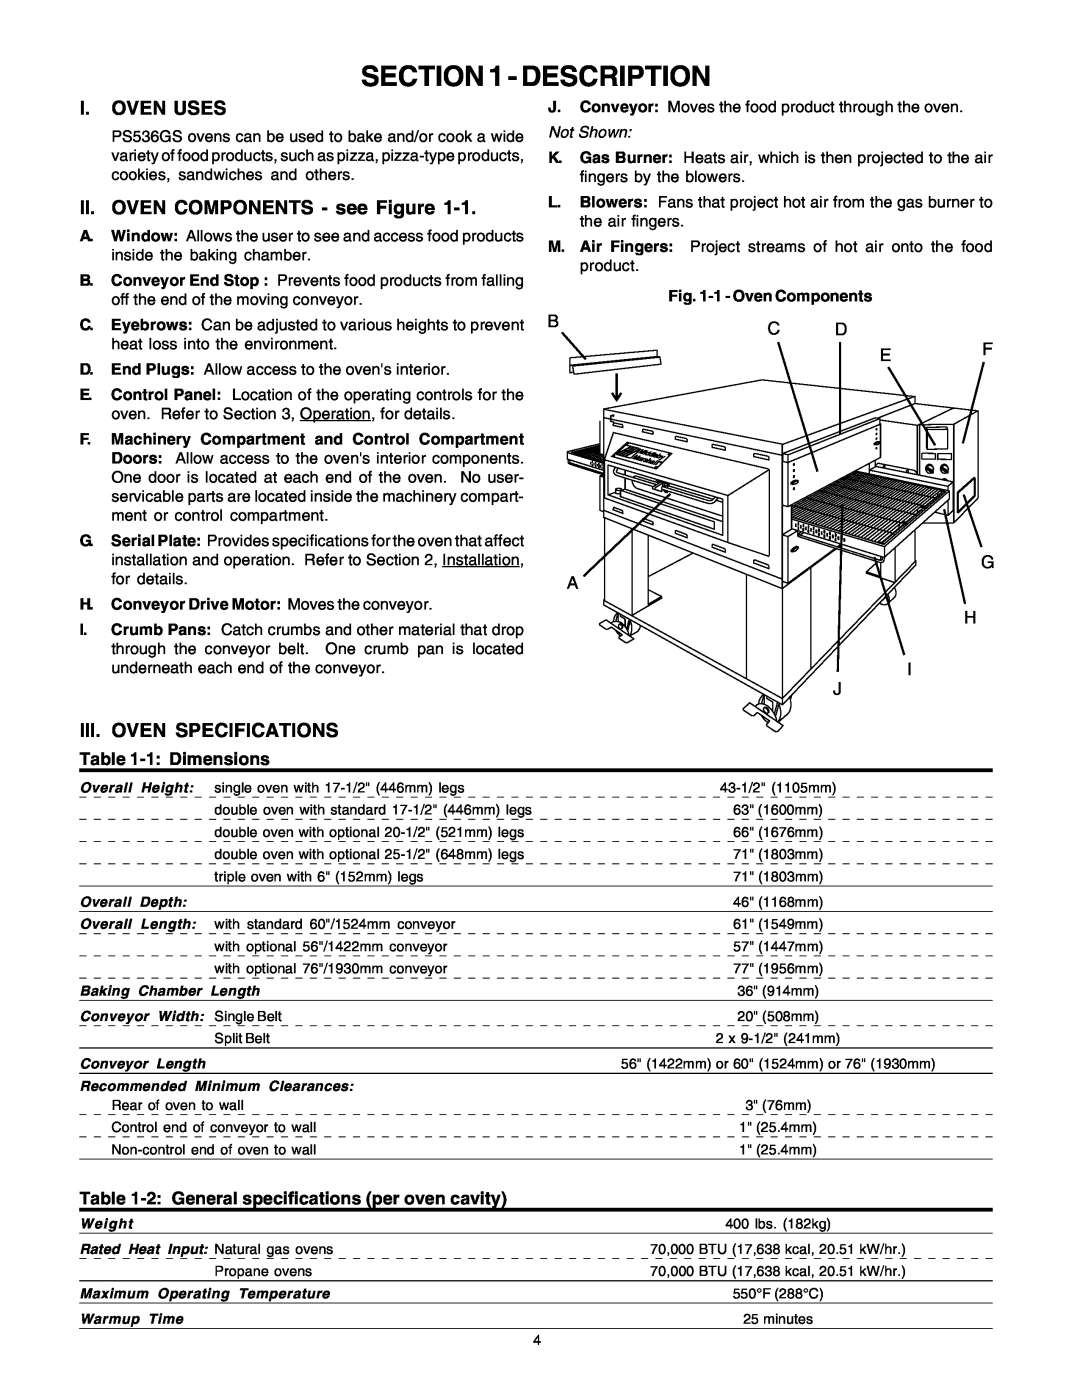 Middleby Marshall PS53GS Gas manual Description, I. Oven Uses, II. OVEN COMPONENTS - see Figure, Iii. Oven Specifications 